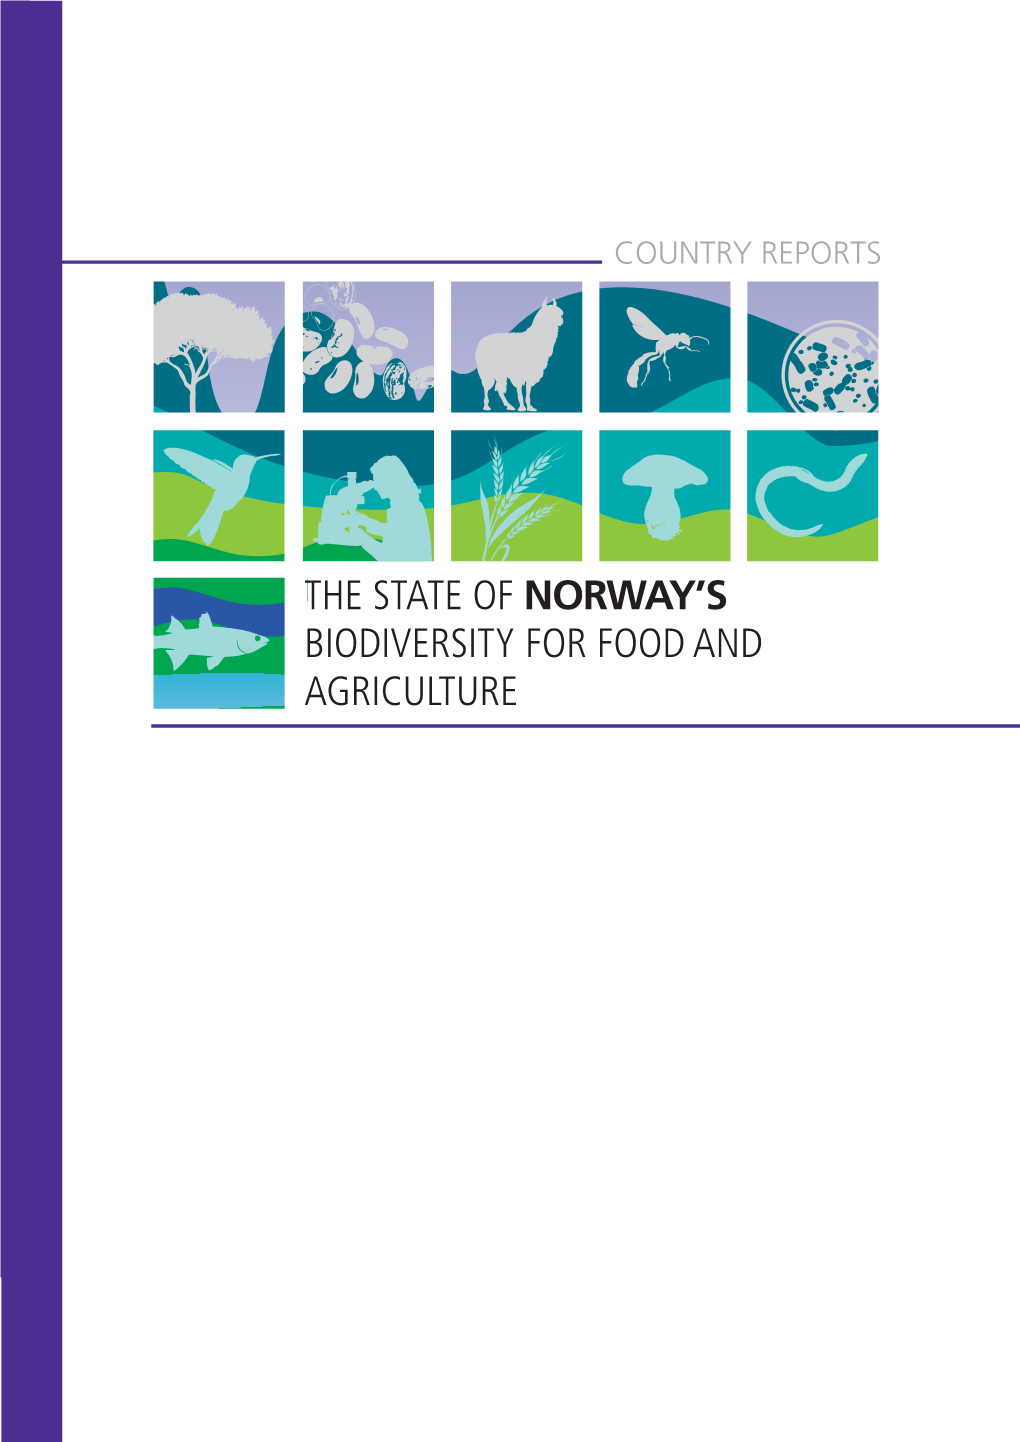 The State of Norway's Biodiversity for Food And